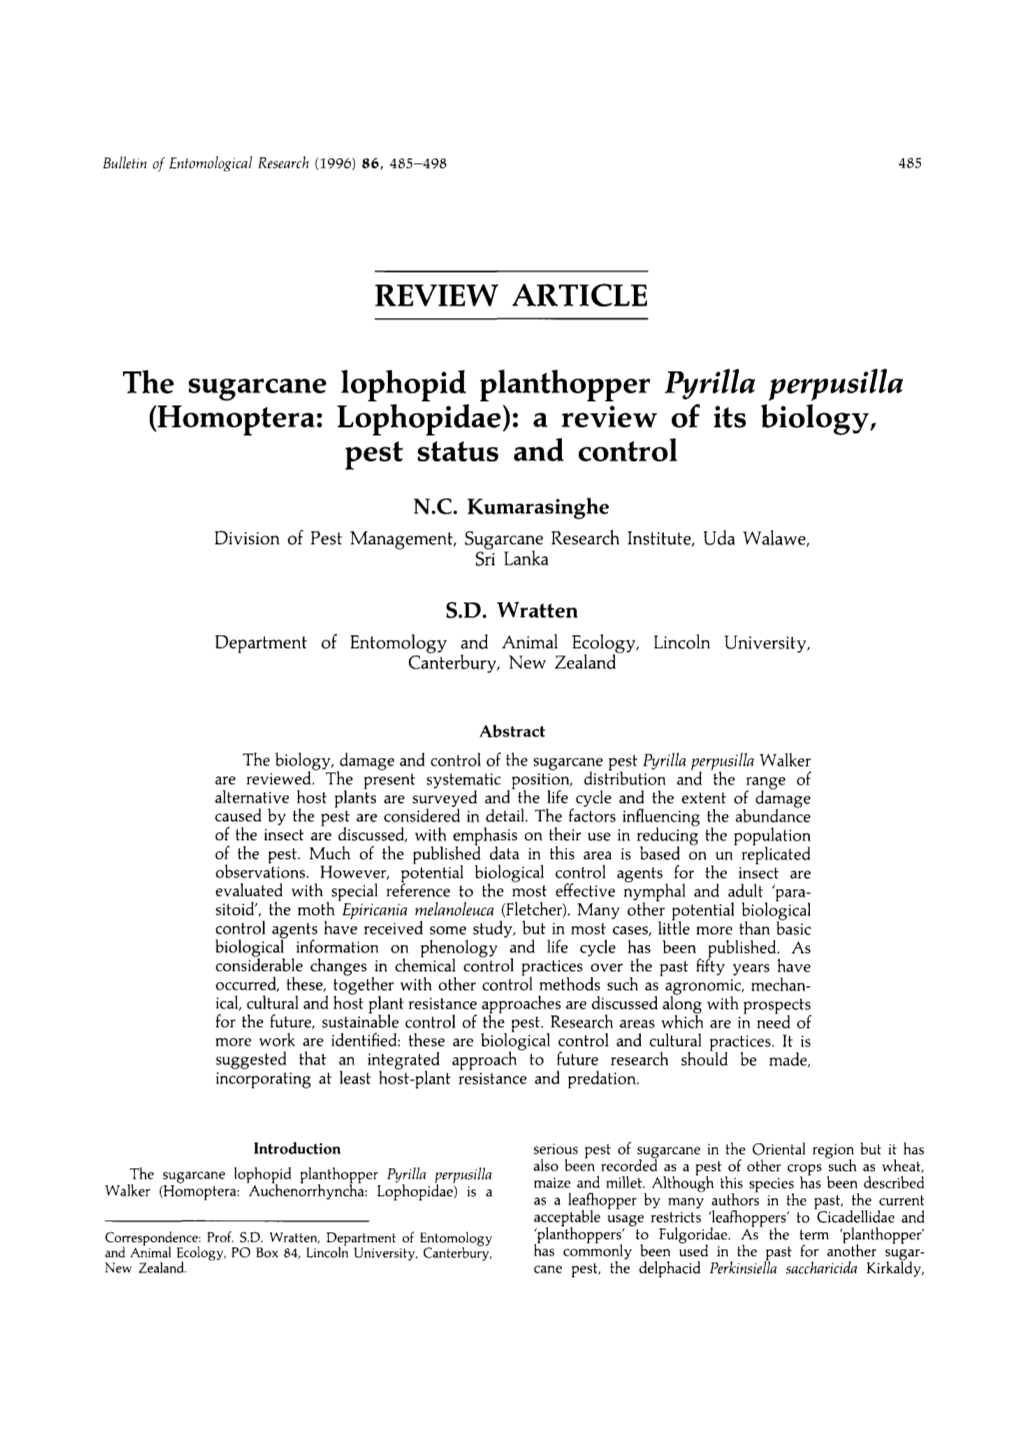 The Sugarcane Lophopid Planthopper Pyrilla Perpusilla (Homoptera: Lophopidae): a Review of Its Biology, Pest Status and Control